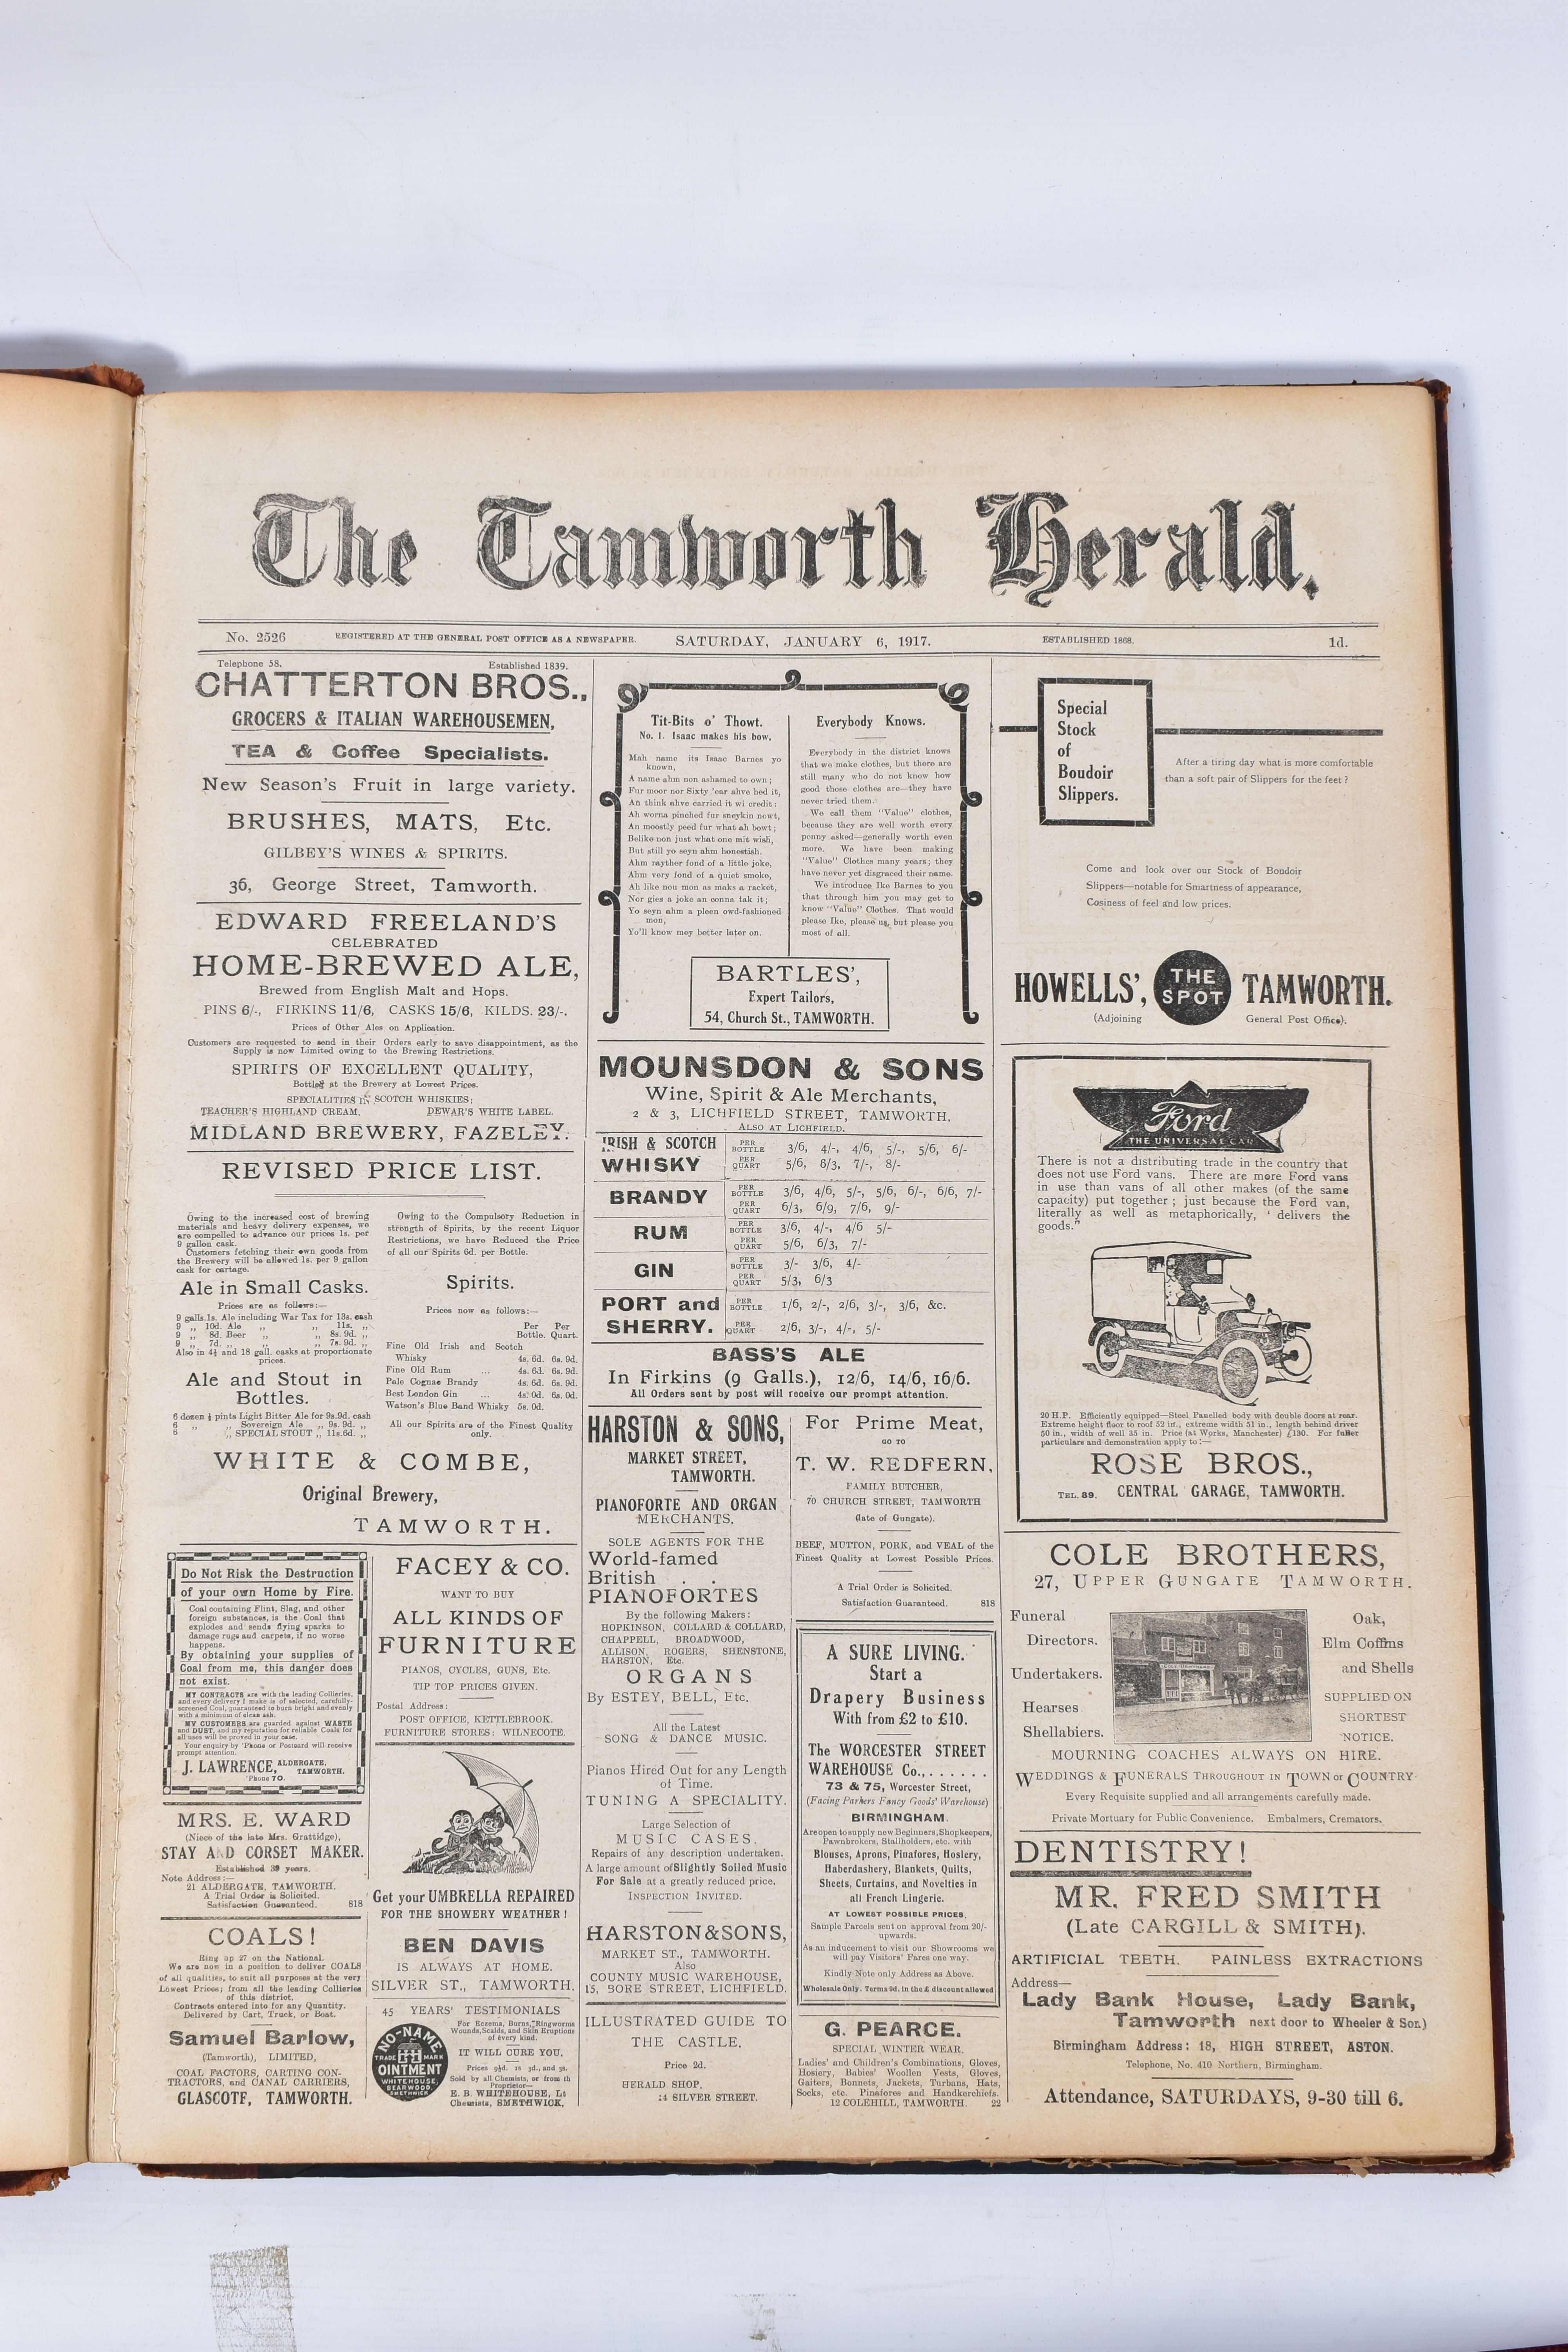 THE TAMWORTH HERALD, an Archive of the Tamworth Herald Newspaper from 1917, the newspapers are bound